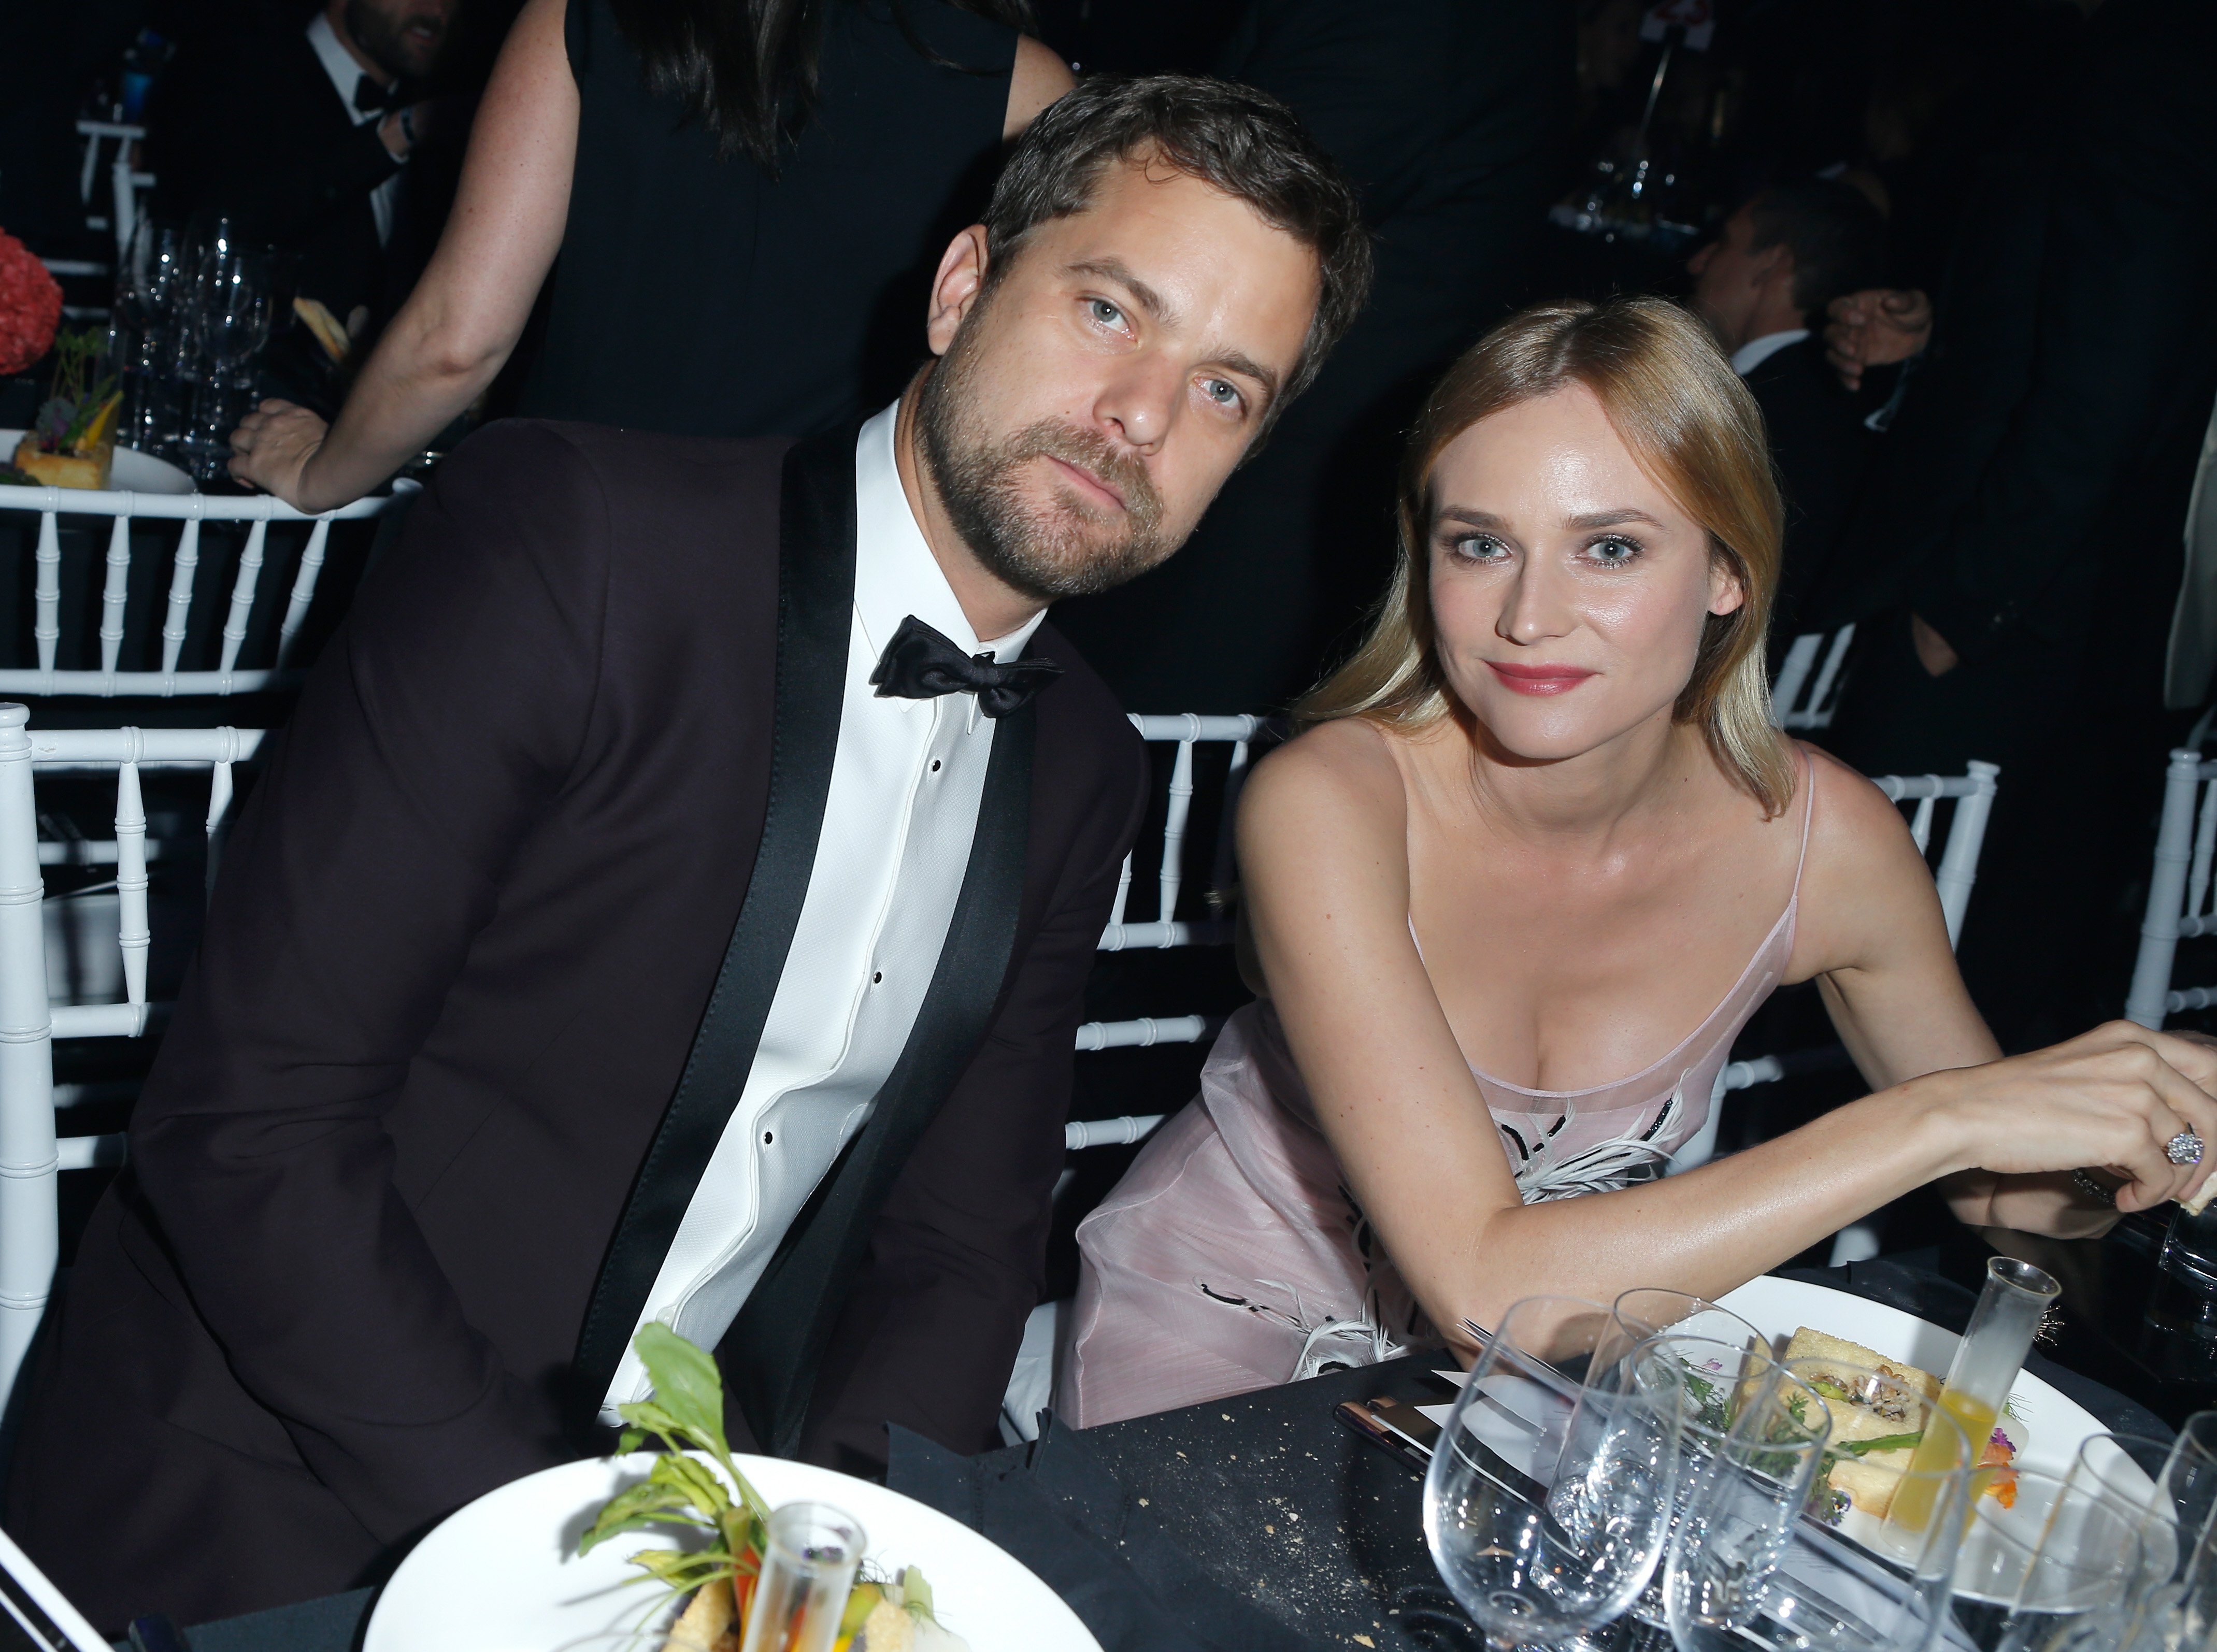 Joshua Jackson and former wife Diane Kruger in at amfAR's Inspirational Gala in October 2015. | Photo: Getty Images